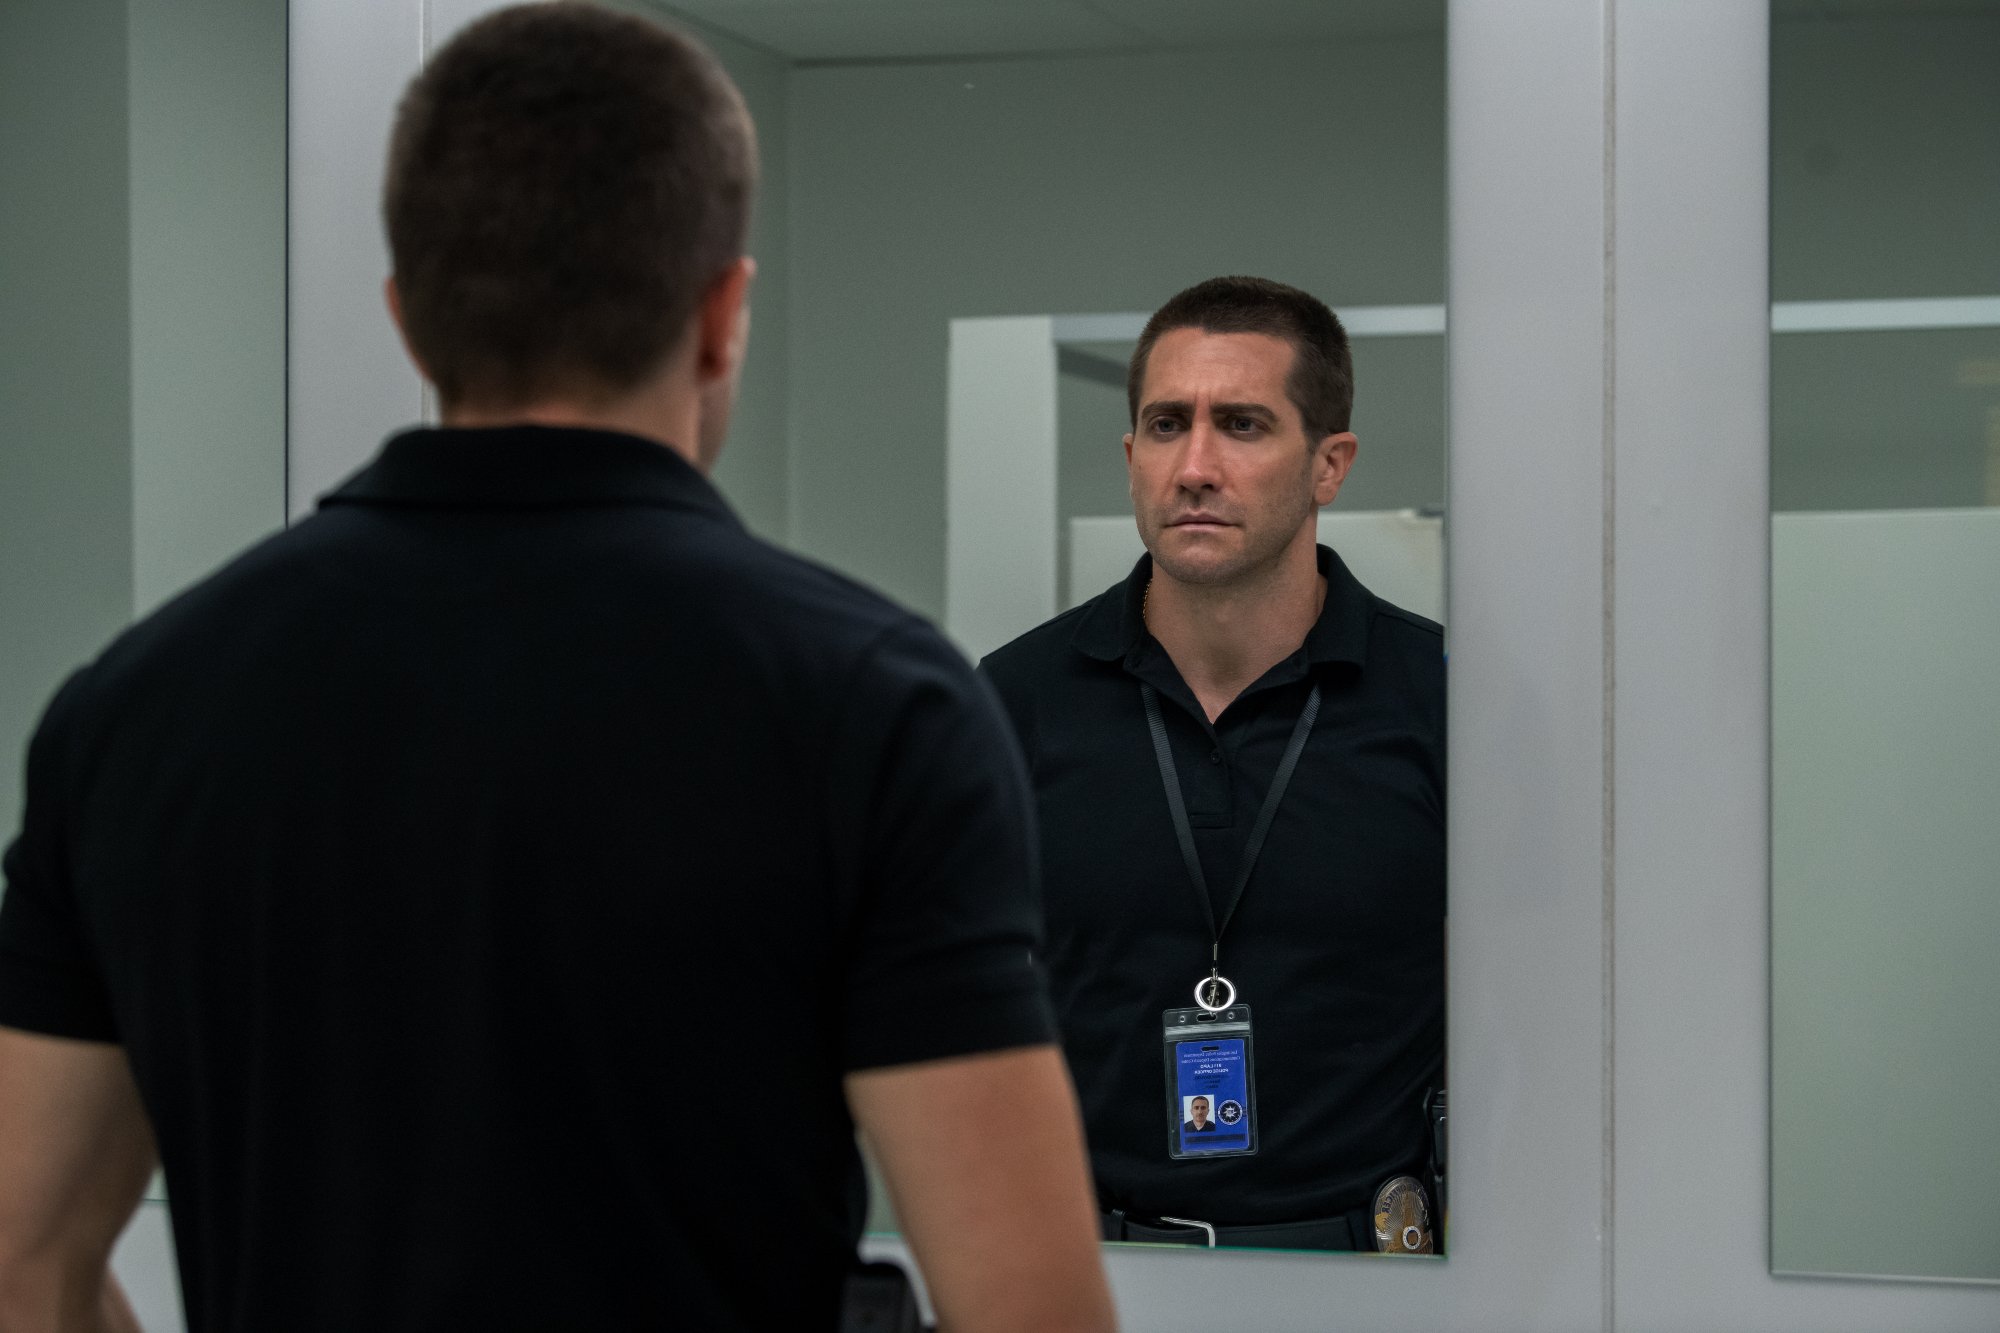 Netflix's 'The Guilty' star Jake Gyllenhaal as Joe Bayler looking in the mirror with his badge on